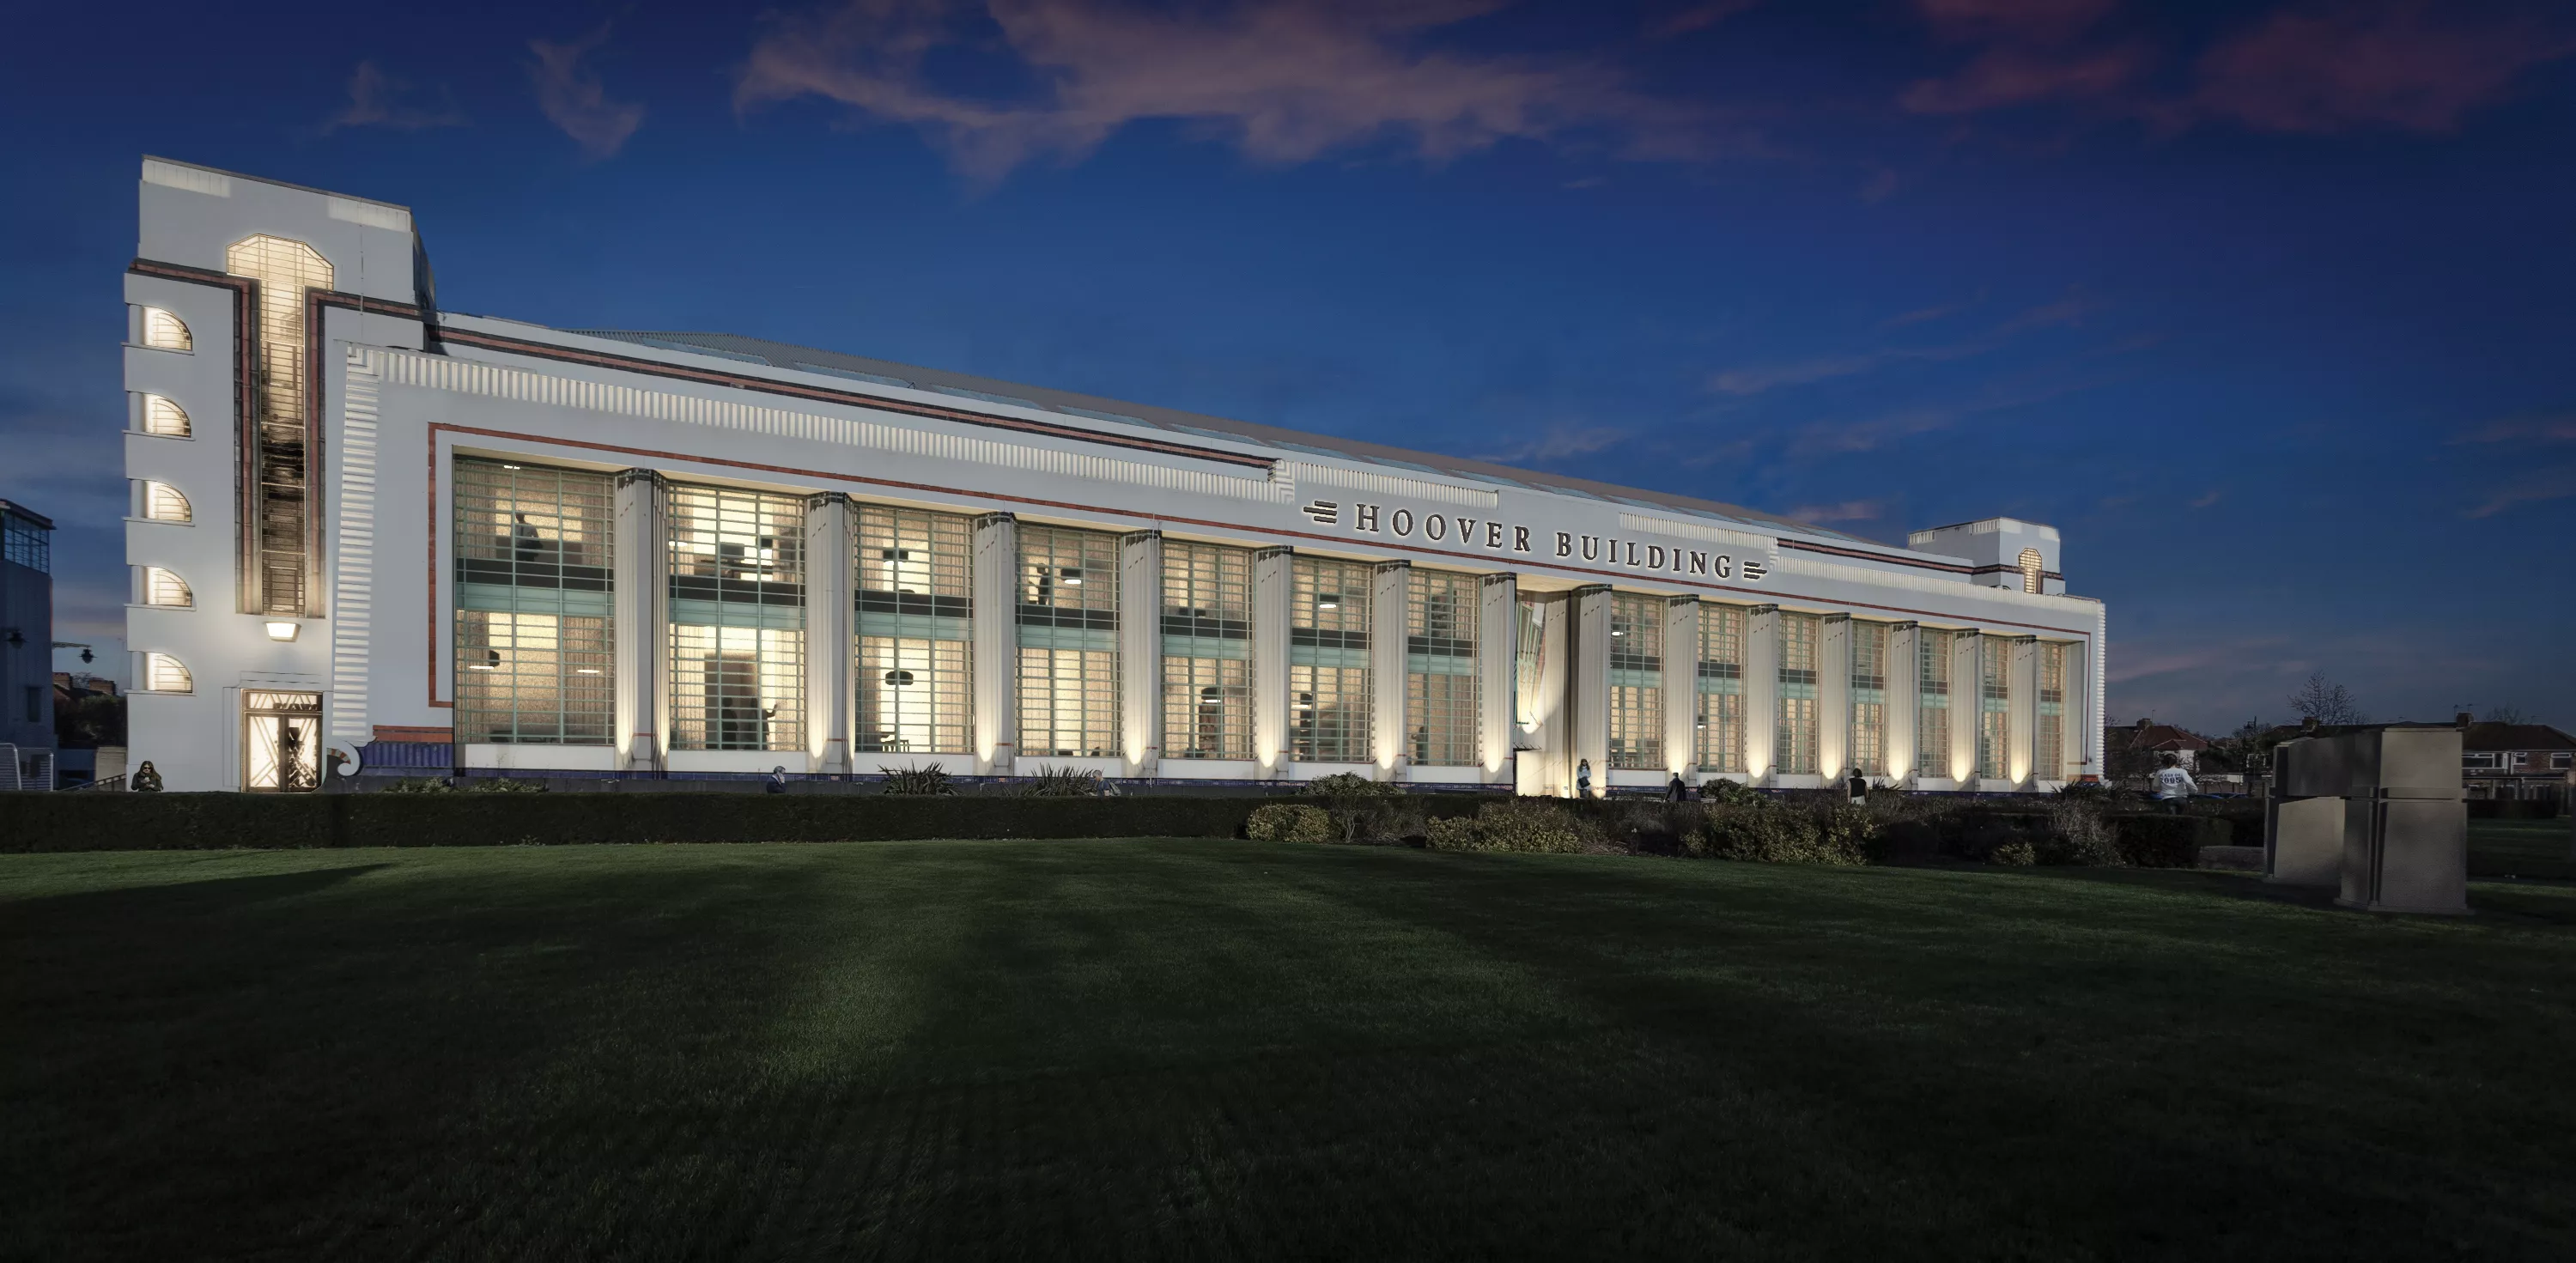 HIMACS helps to restore the emblematic Hoover Building